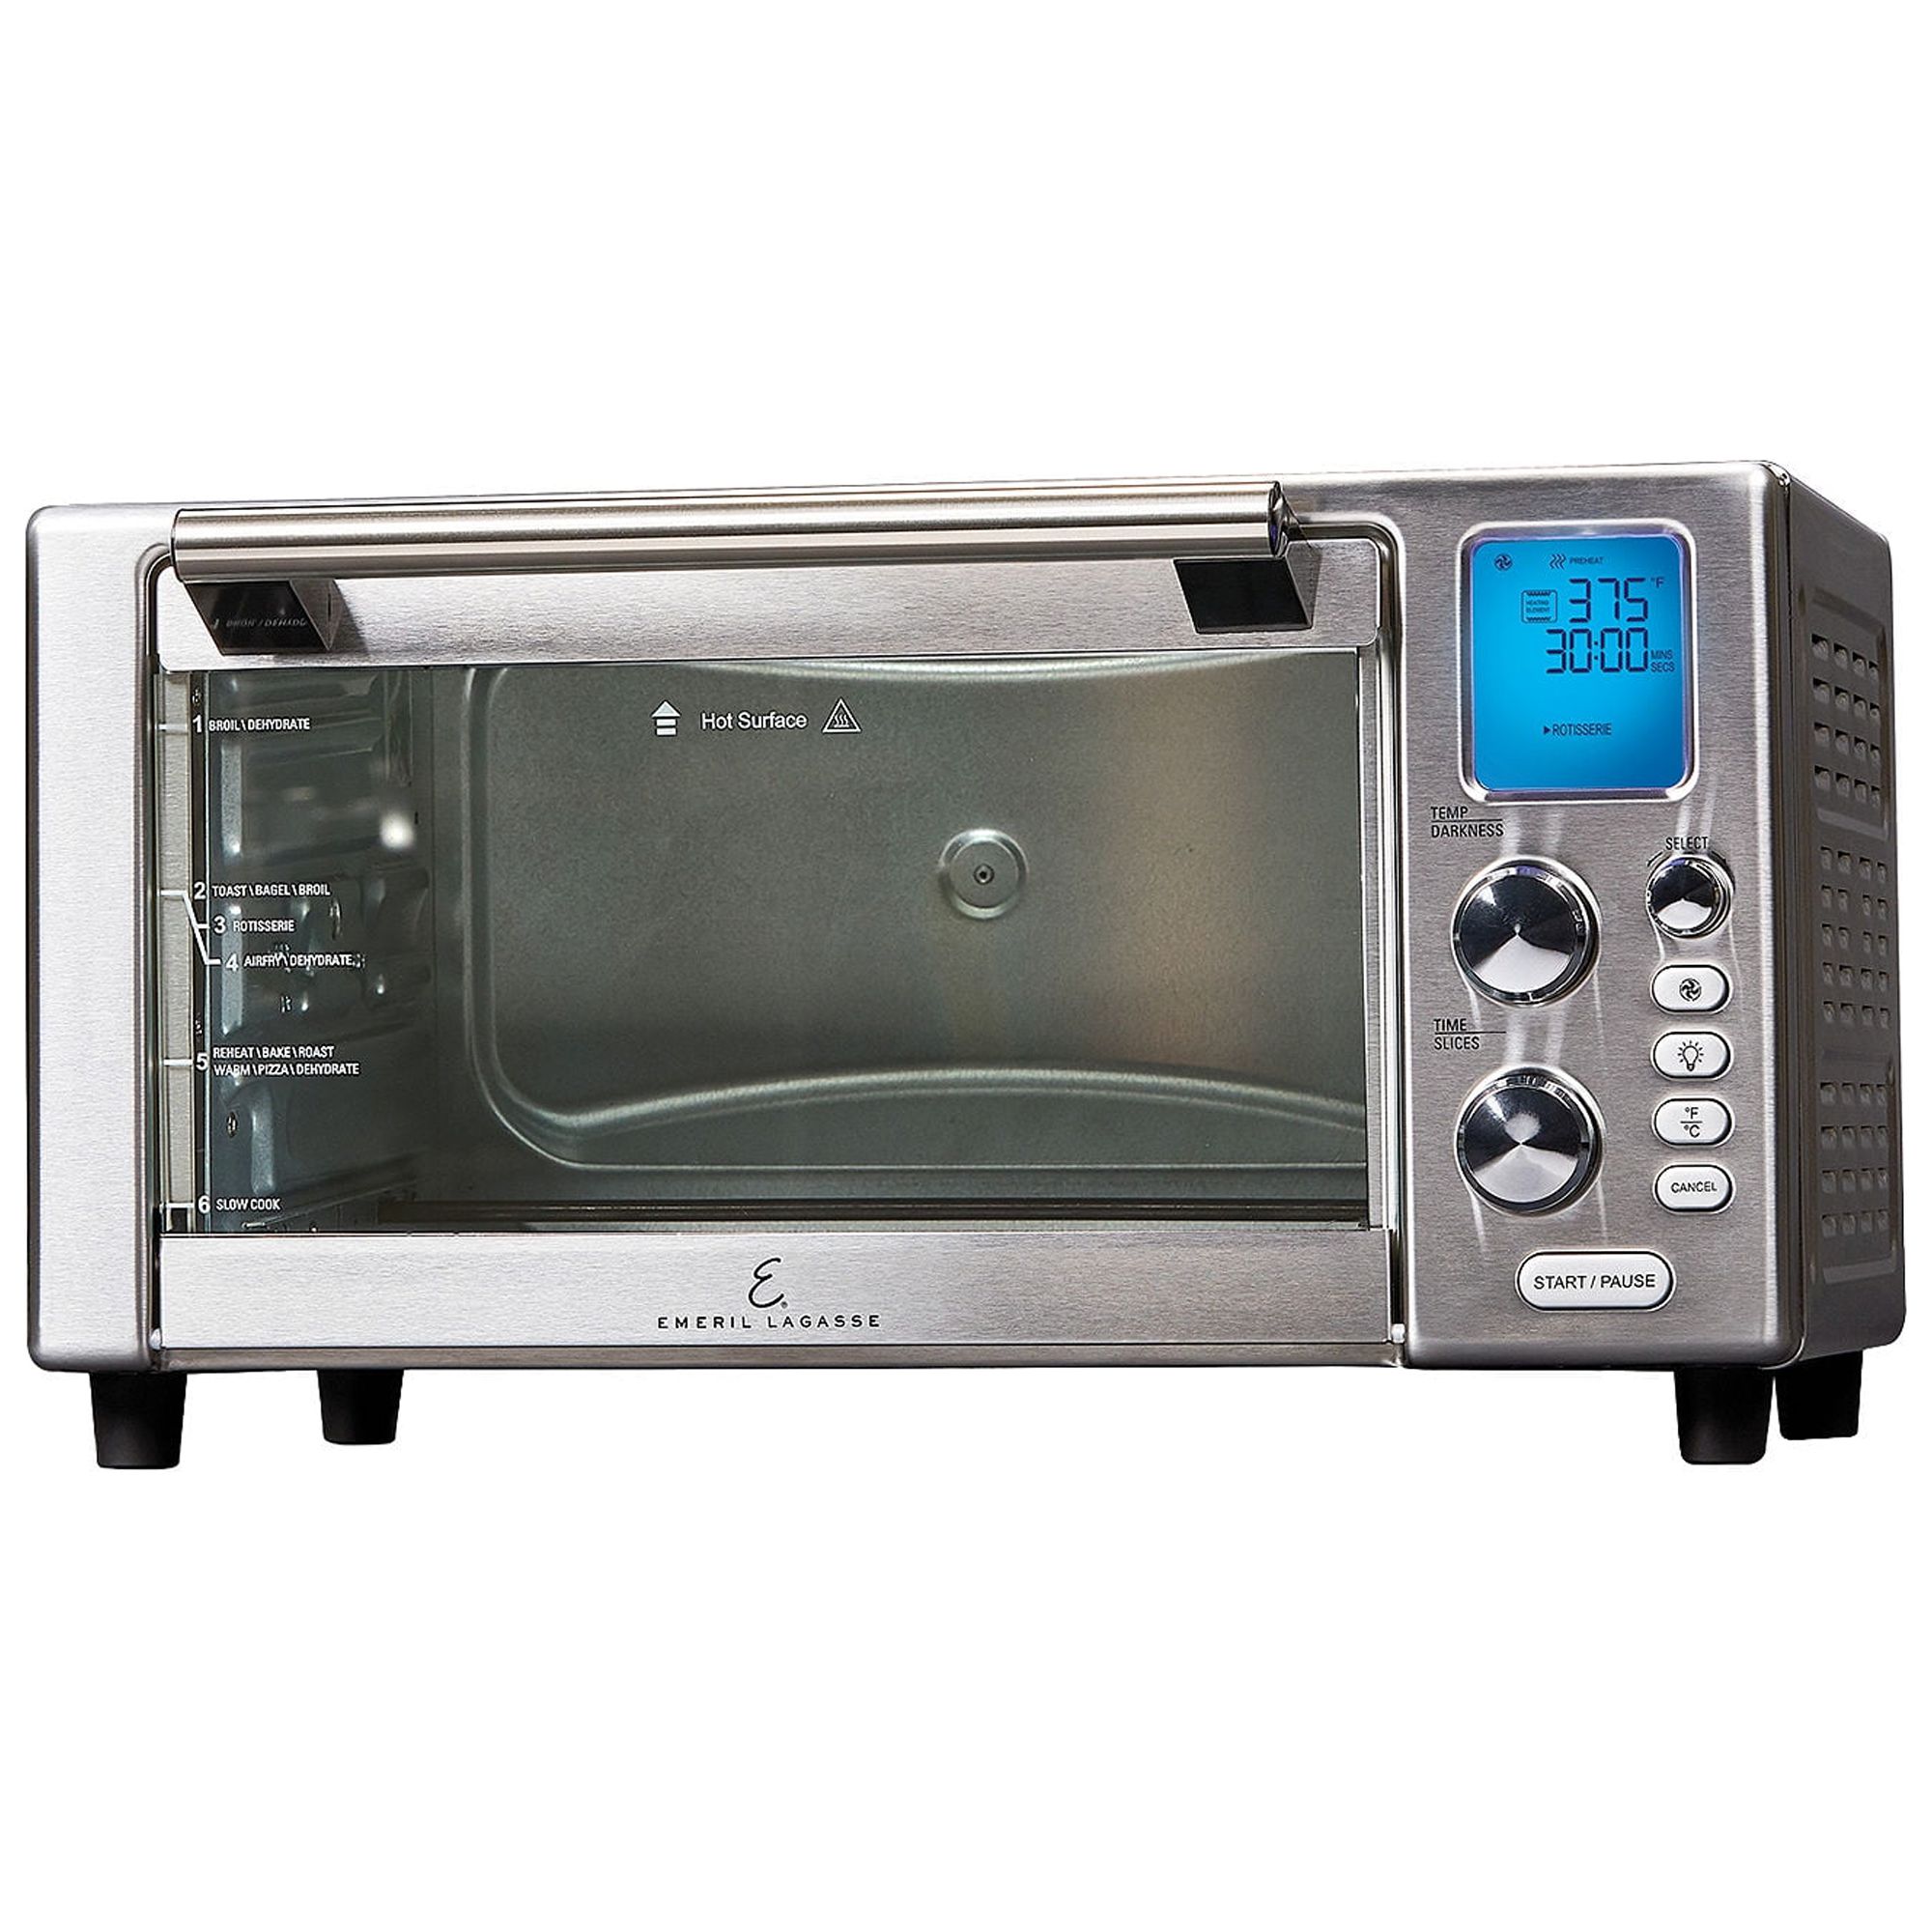 Emeril Lagasse - Air Fry Toaster Oven - Brushed Stainless Steel - image 2 of 5